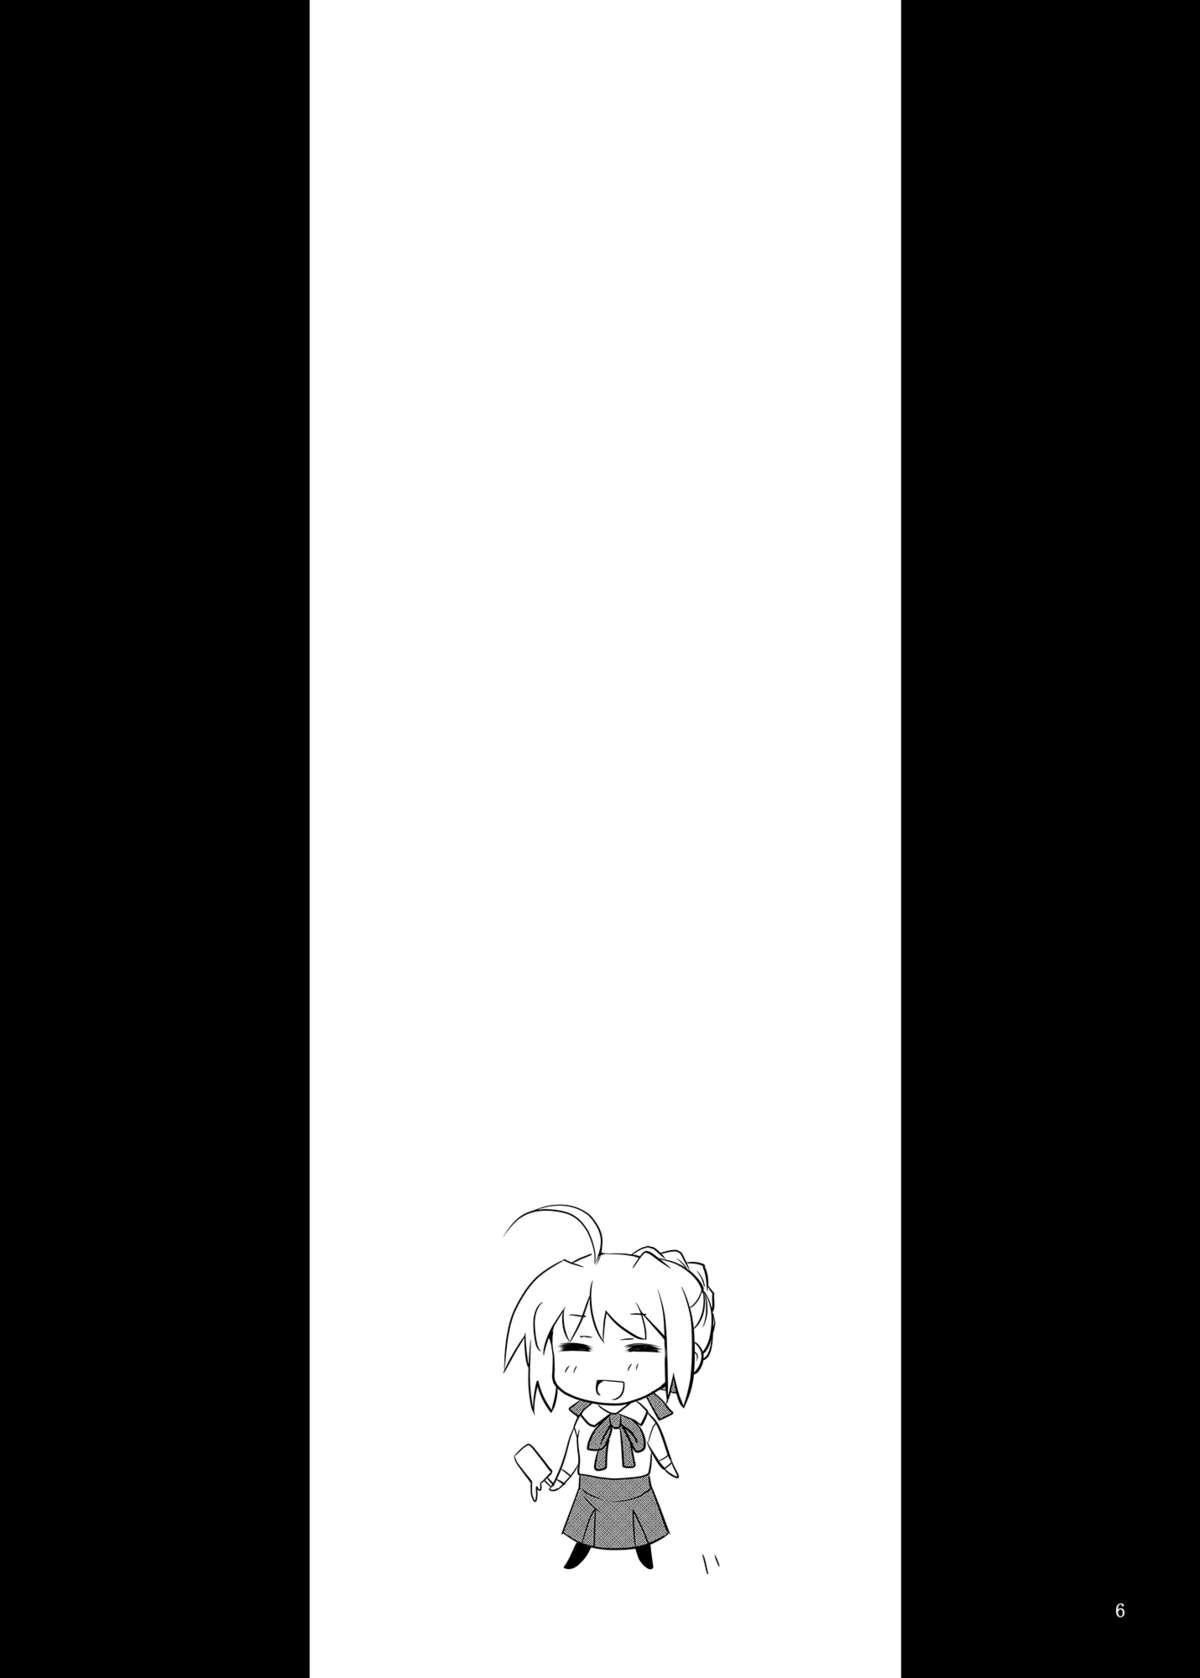 Beurette Fate/fireworks - Fate stay night Free Rough Porn - Page 5